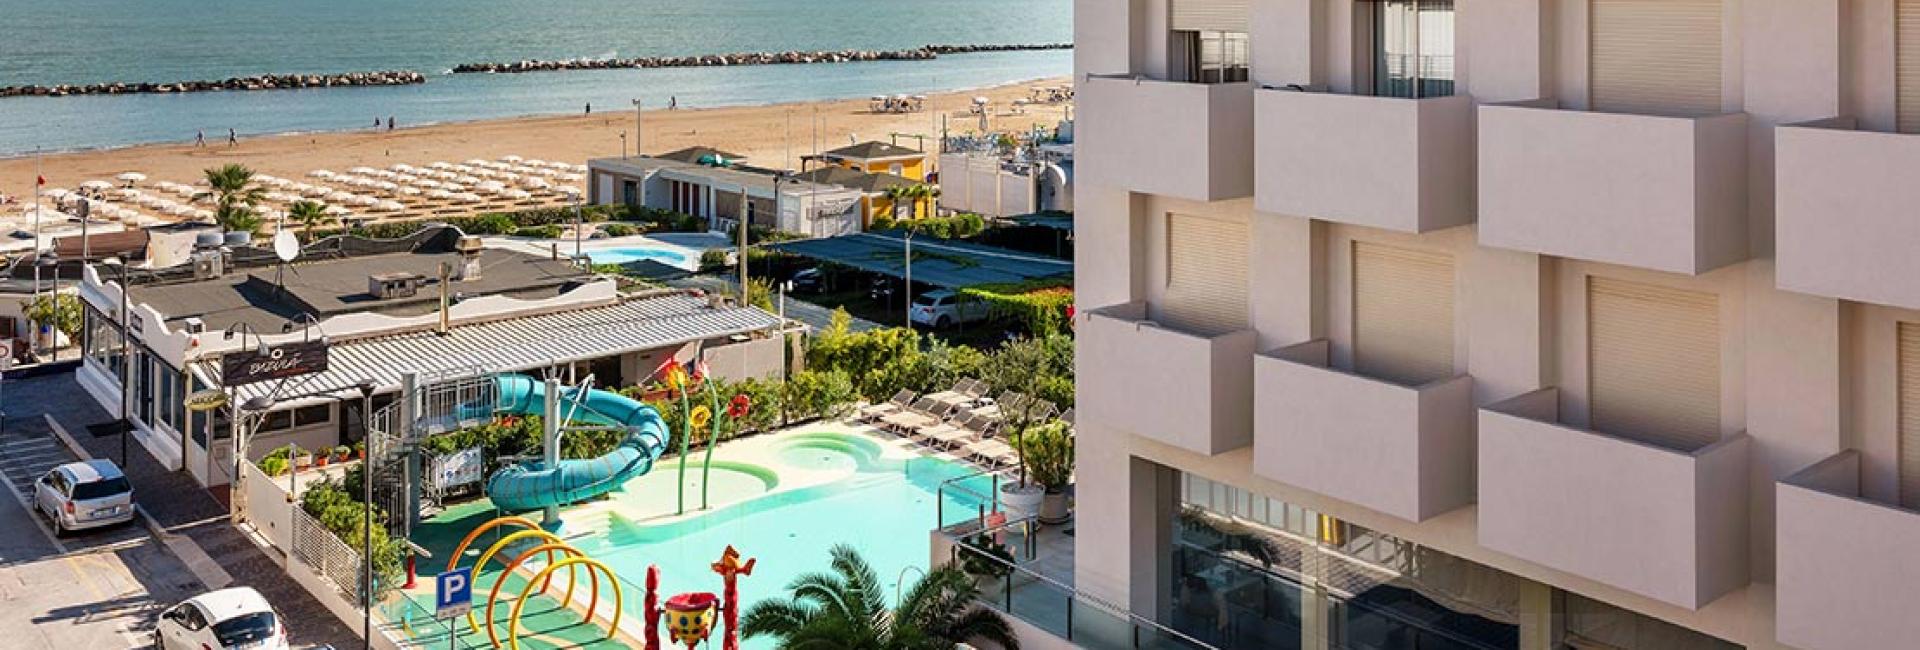 cattolicafamilyresort en holiday-in-cattolica-premium-booking-special-rates 011